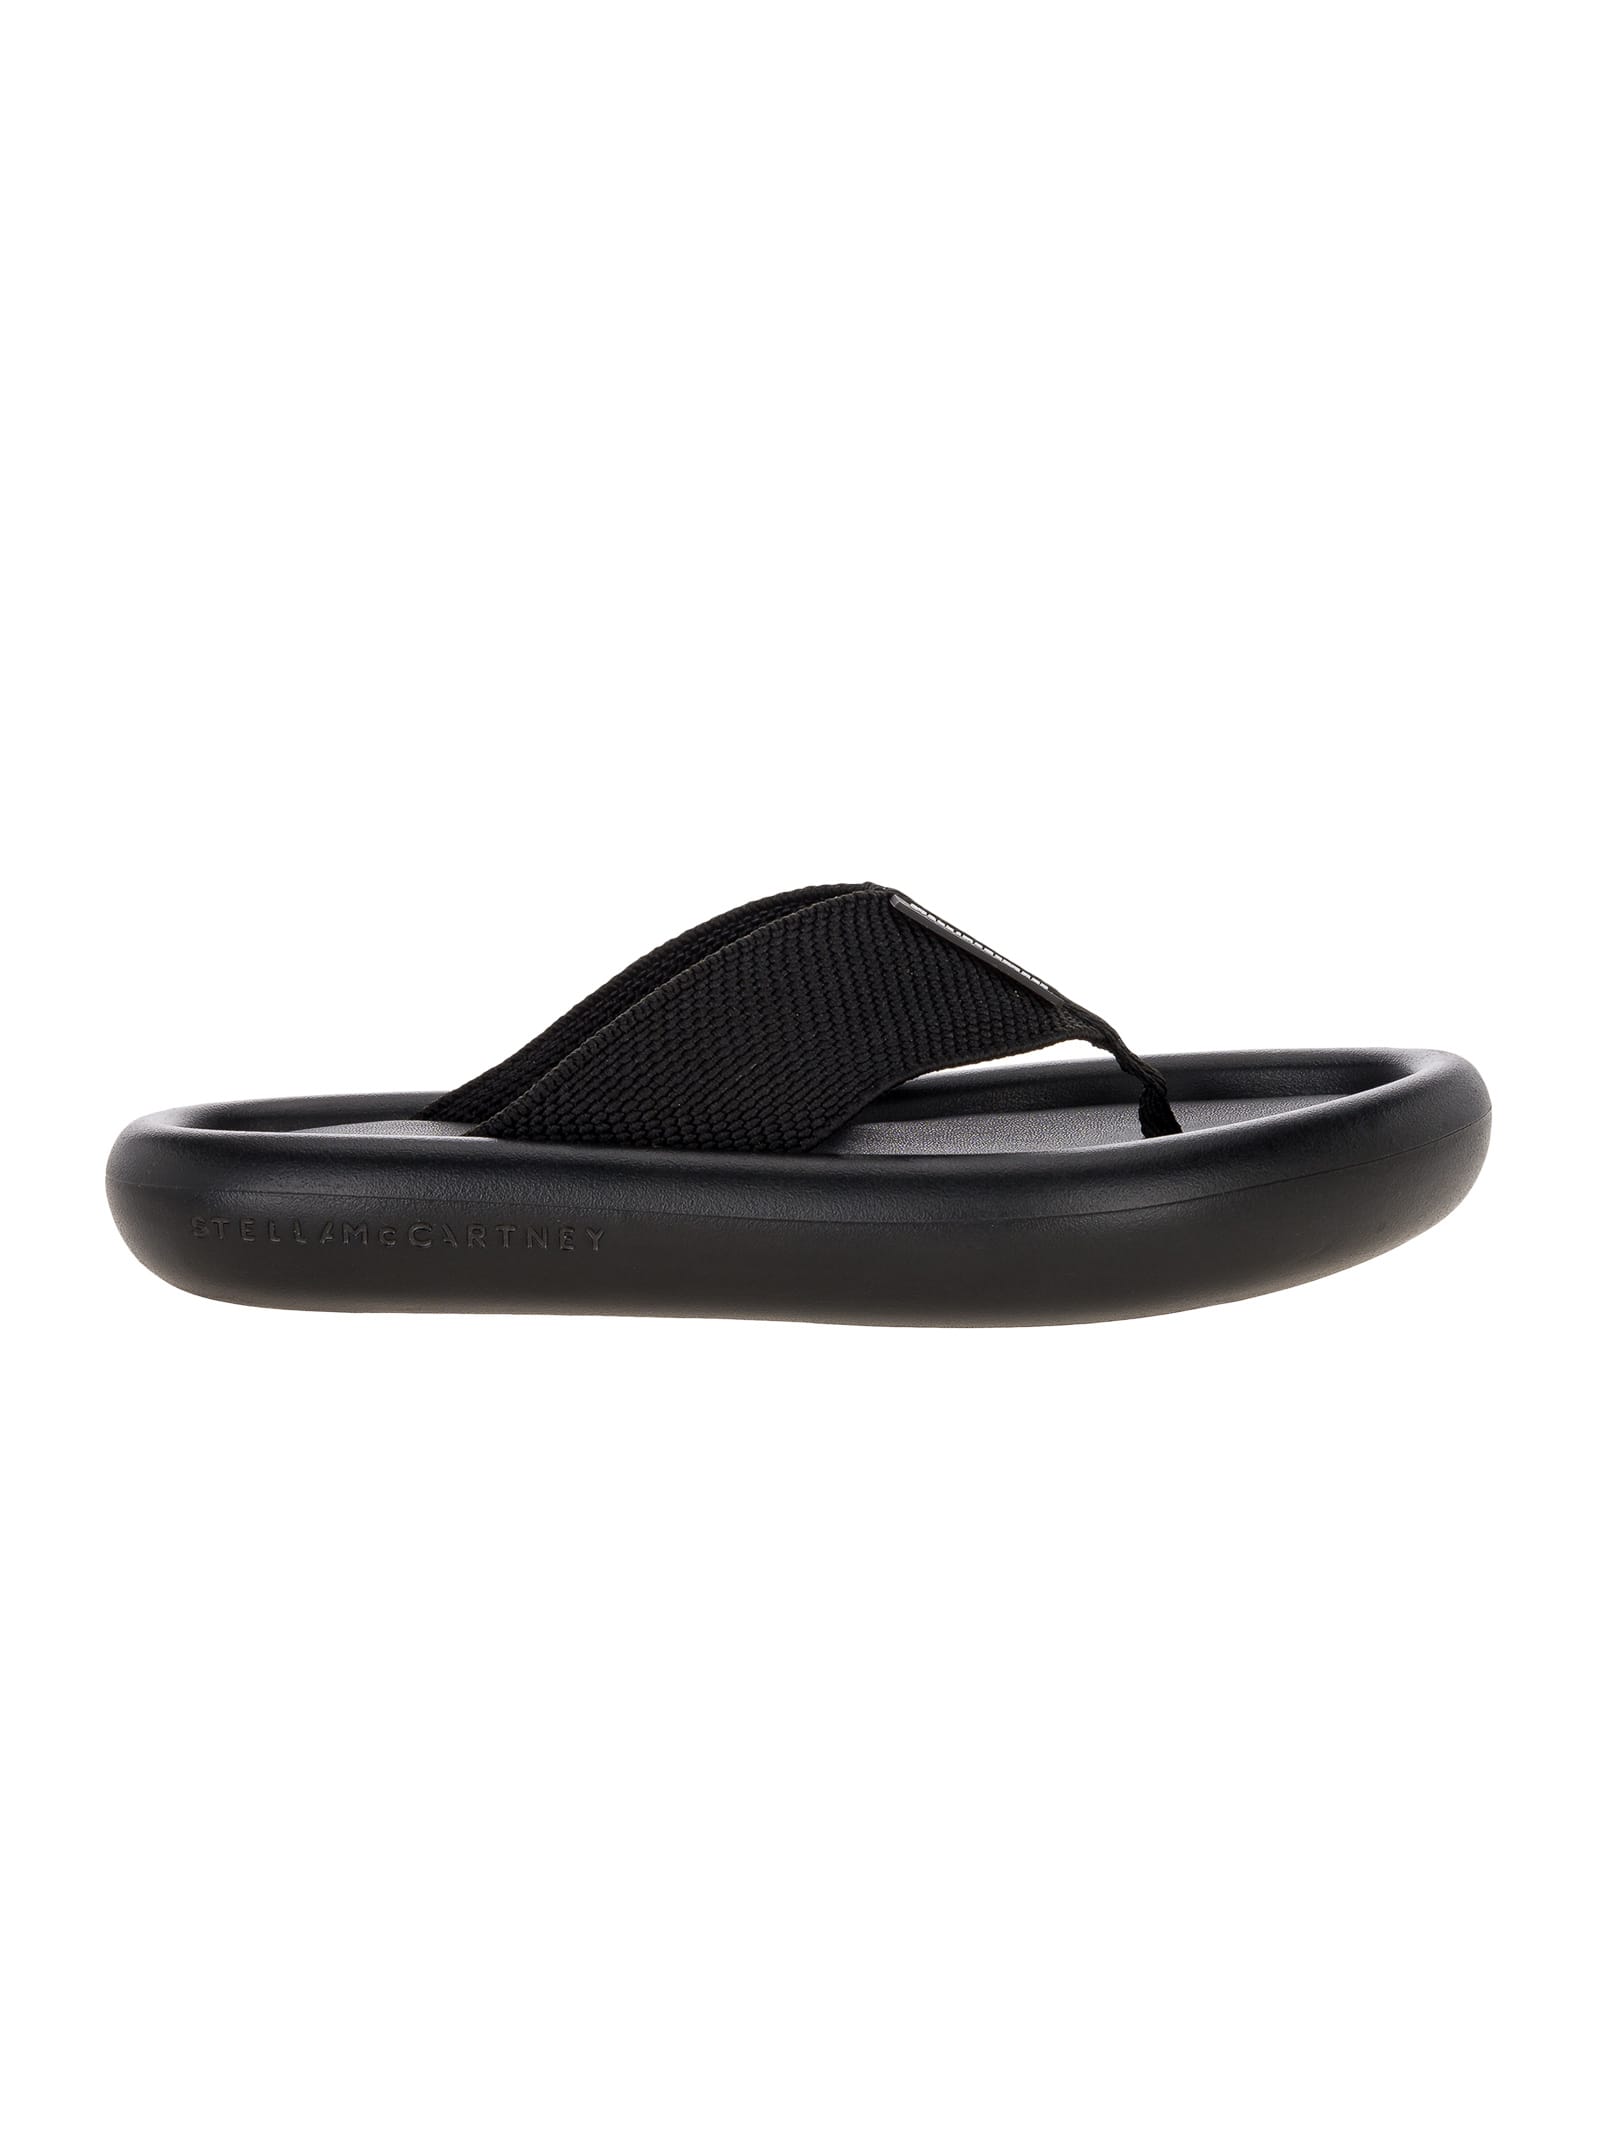 Buy Stella Mccartney Air Slide online, shop Stella McCartney shoes with free shipping